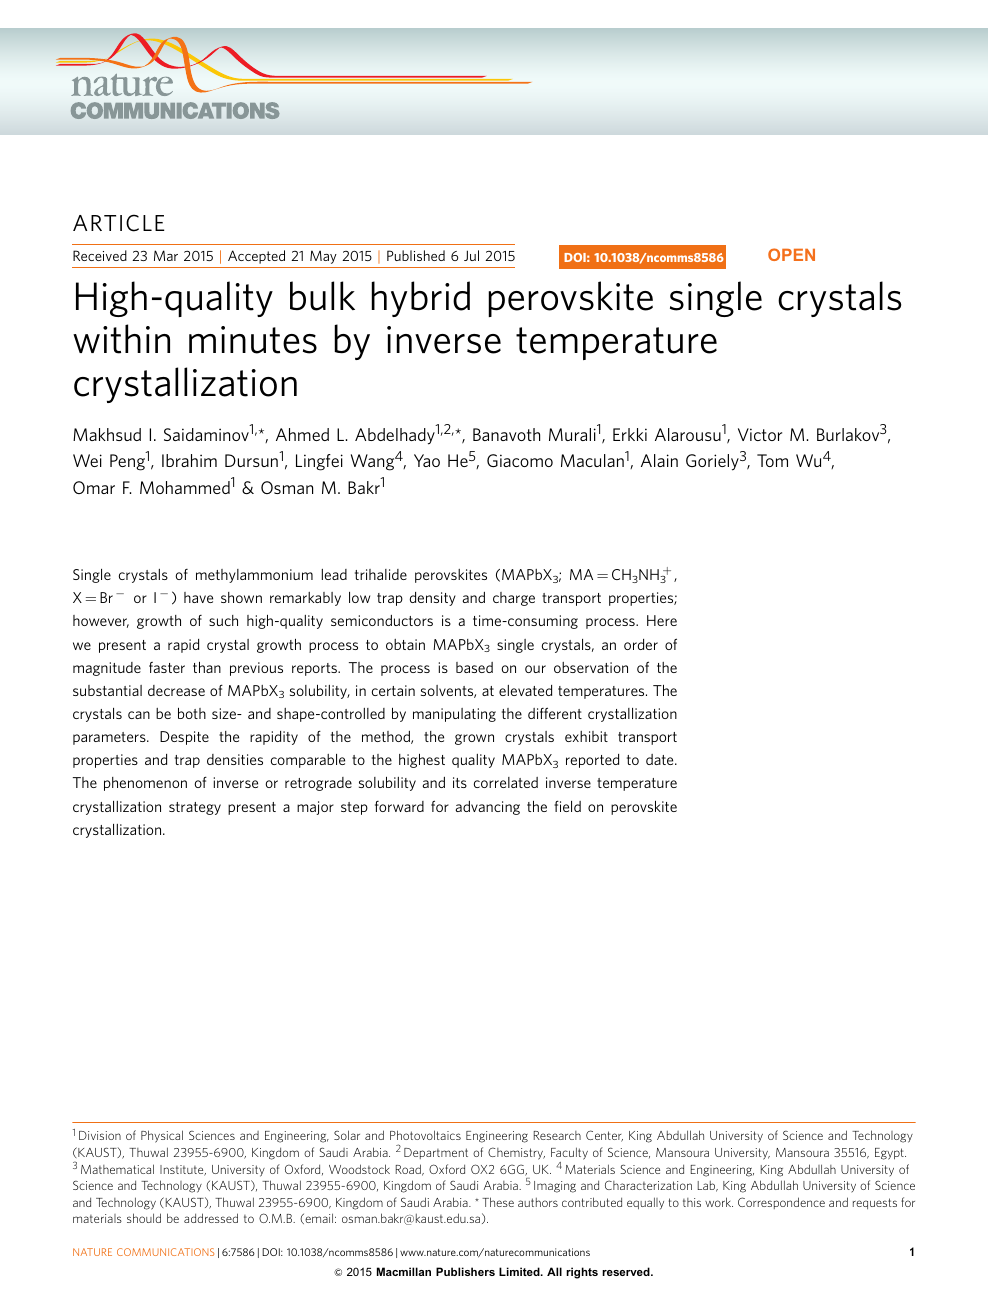 High Quality Bulk Hybrid Perovskite Single Crystals Within Minutes By Inverse Temperature Crystallization Topic Of Research Paper In Nano Technology Download Scholarly Article Pdf And Read For Free On Cyberleninka Open Science Hub